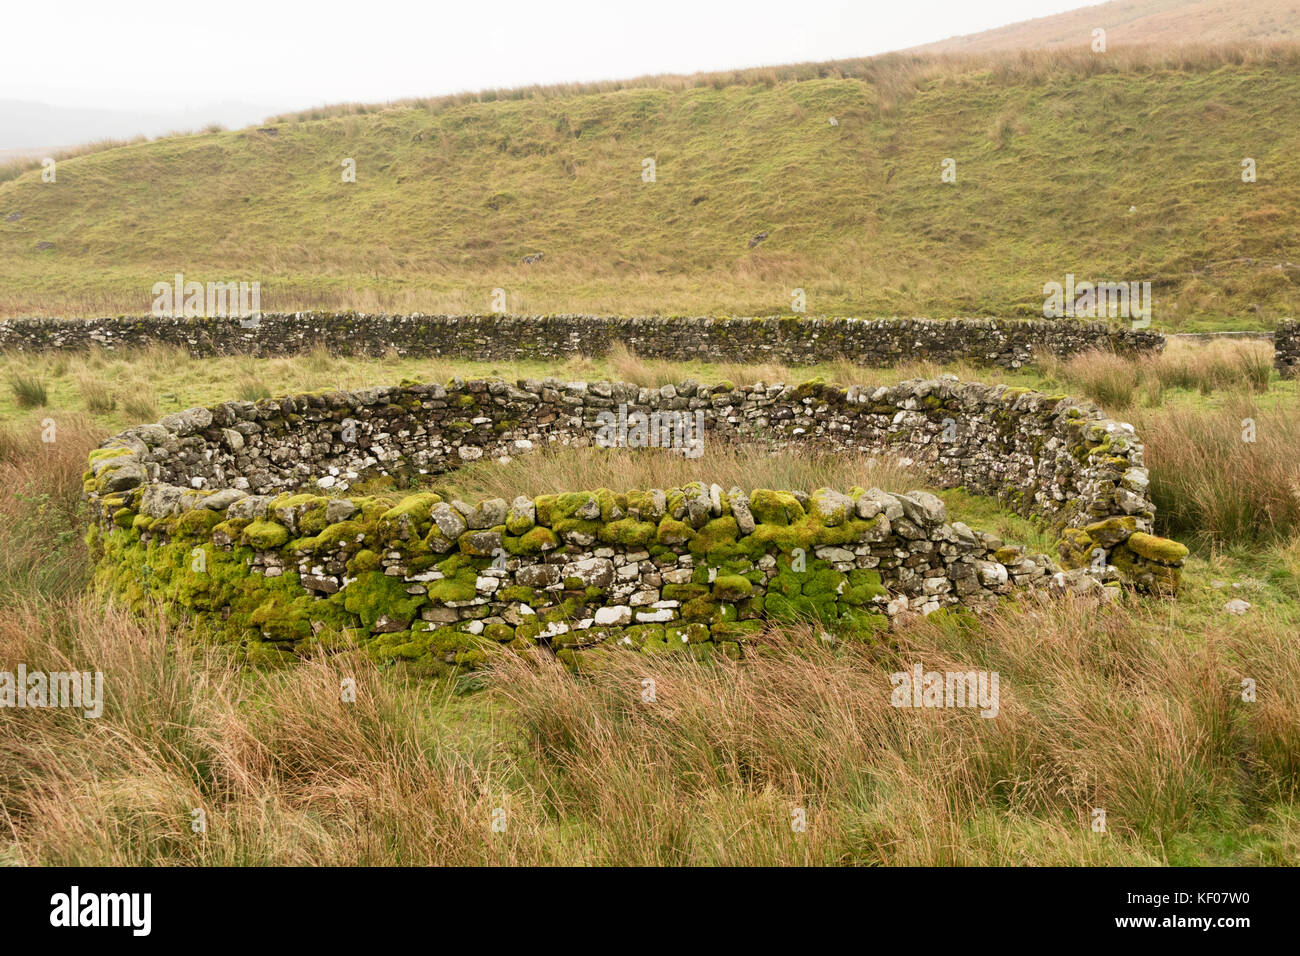 A traditional round sheep pen or enclosure in the Northumberland National Park, England, UK Stock Photo